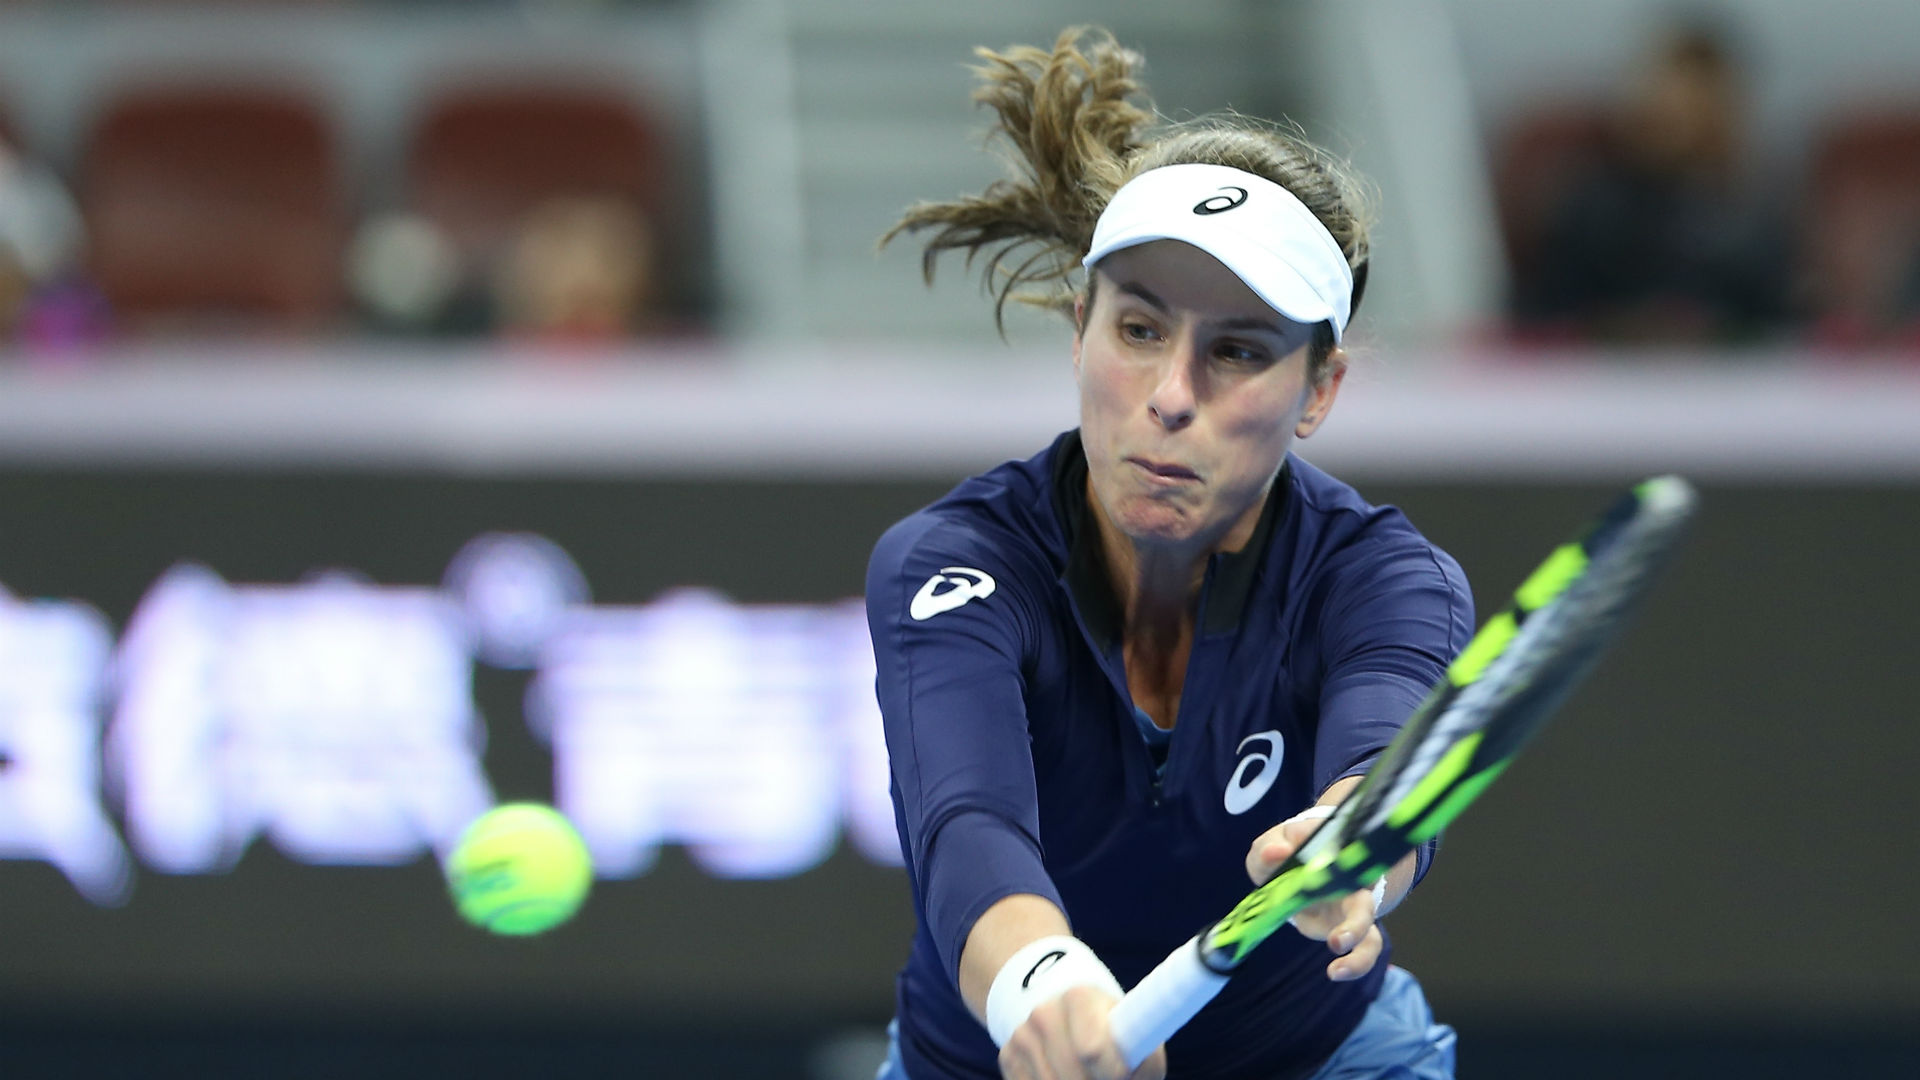 Johanna Konta has had a 2018 to forget but the British number one reached round two in Moscow at Elise Mertens' expense.